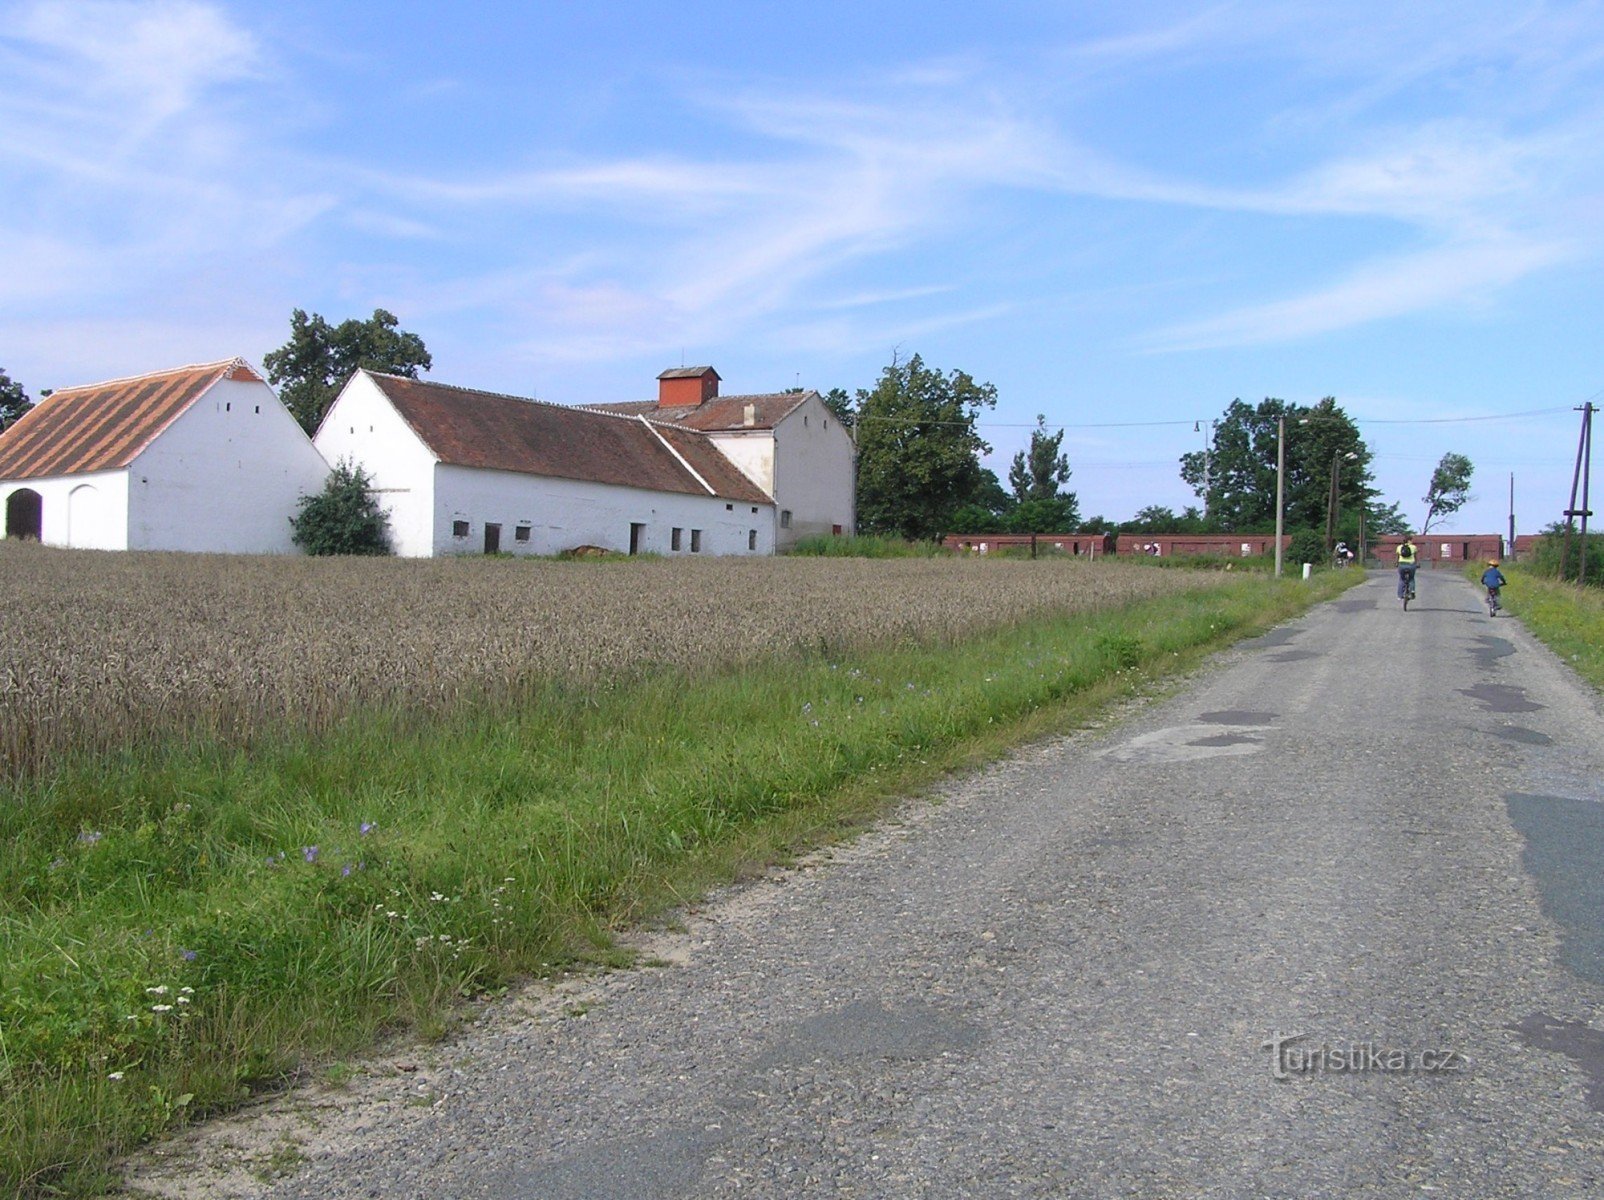 the road from the village to žel. the station